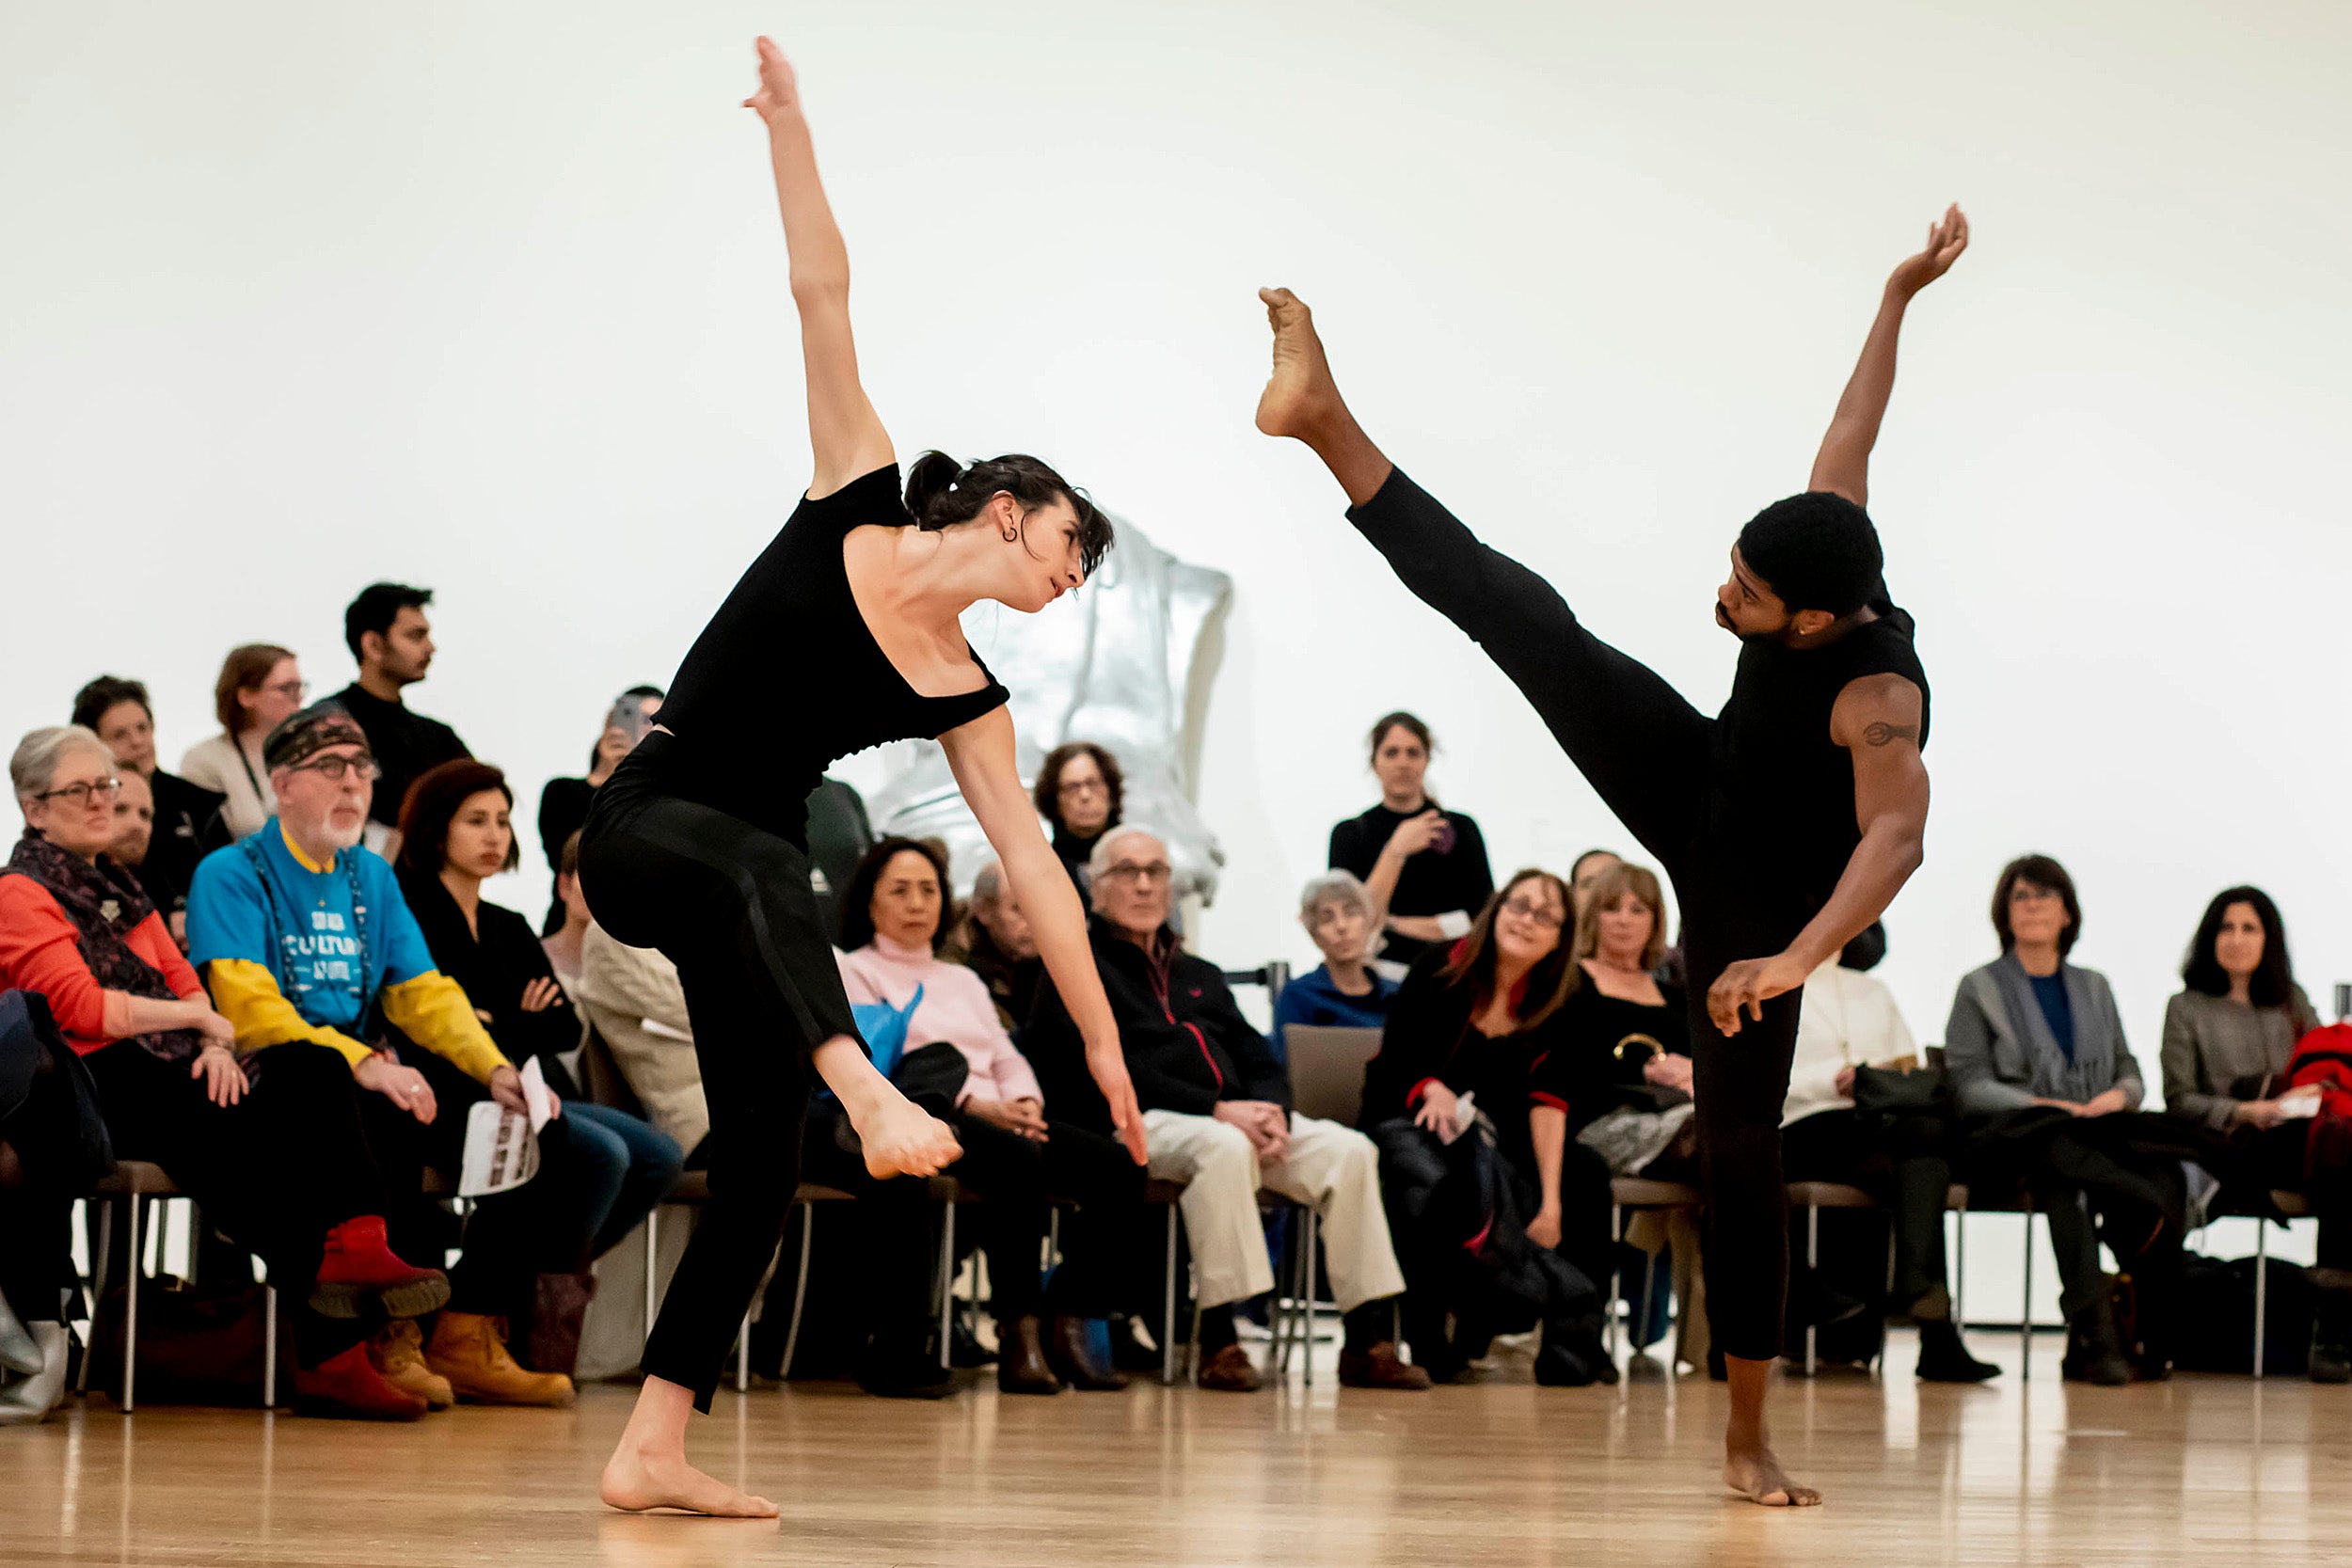 How a grad student choreographs life in science and art